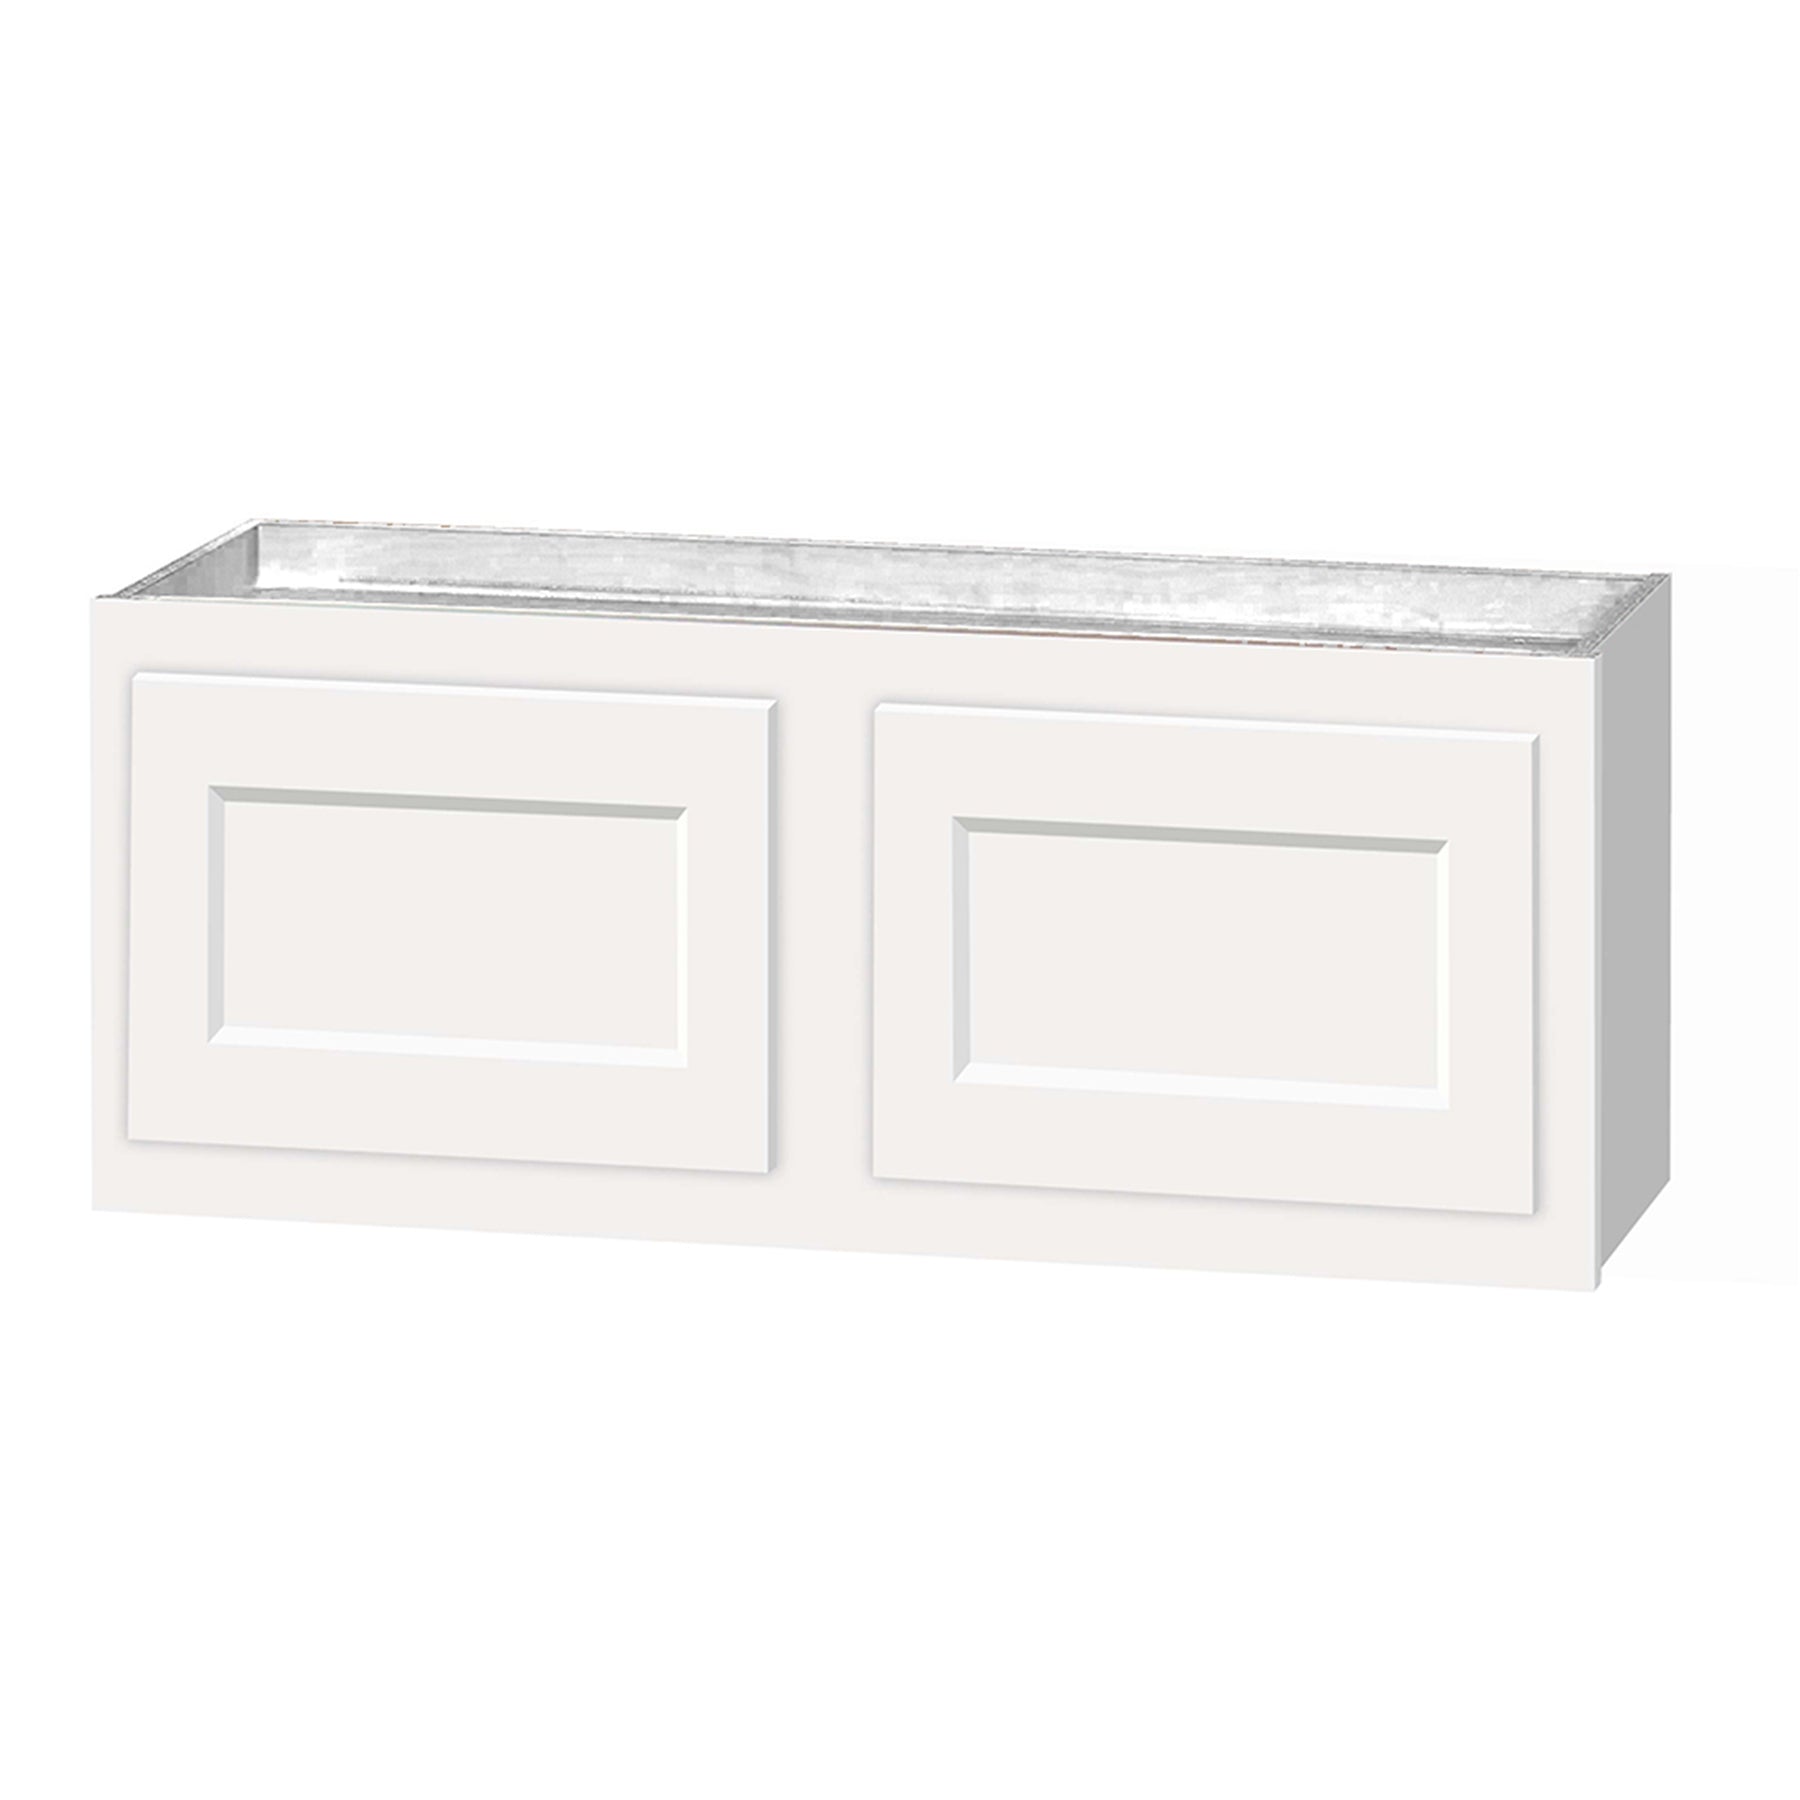 12 inch Wall Cabinets - Dwhite Shaker - 30 Inch W x 12 Inch H x 12 Inch D